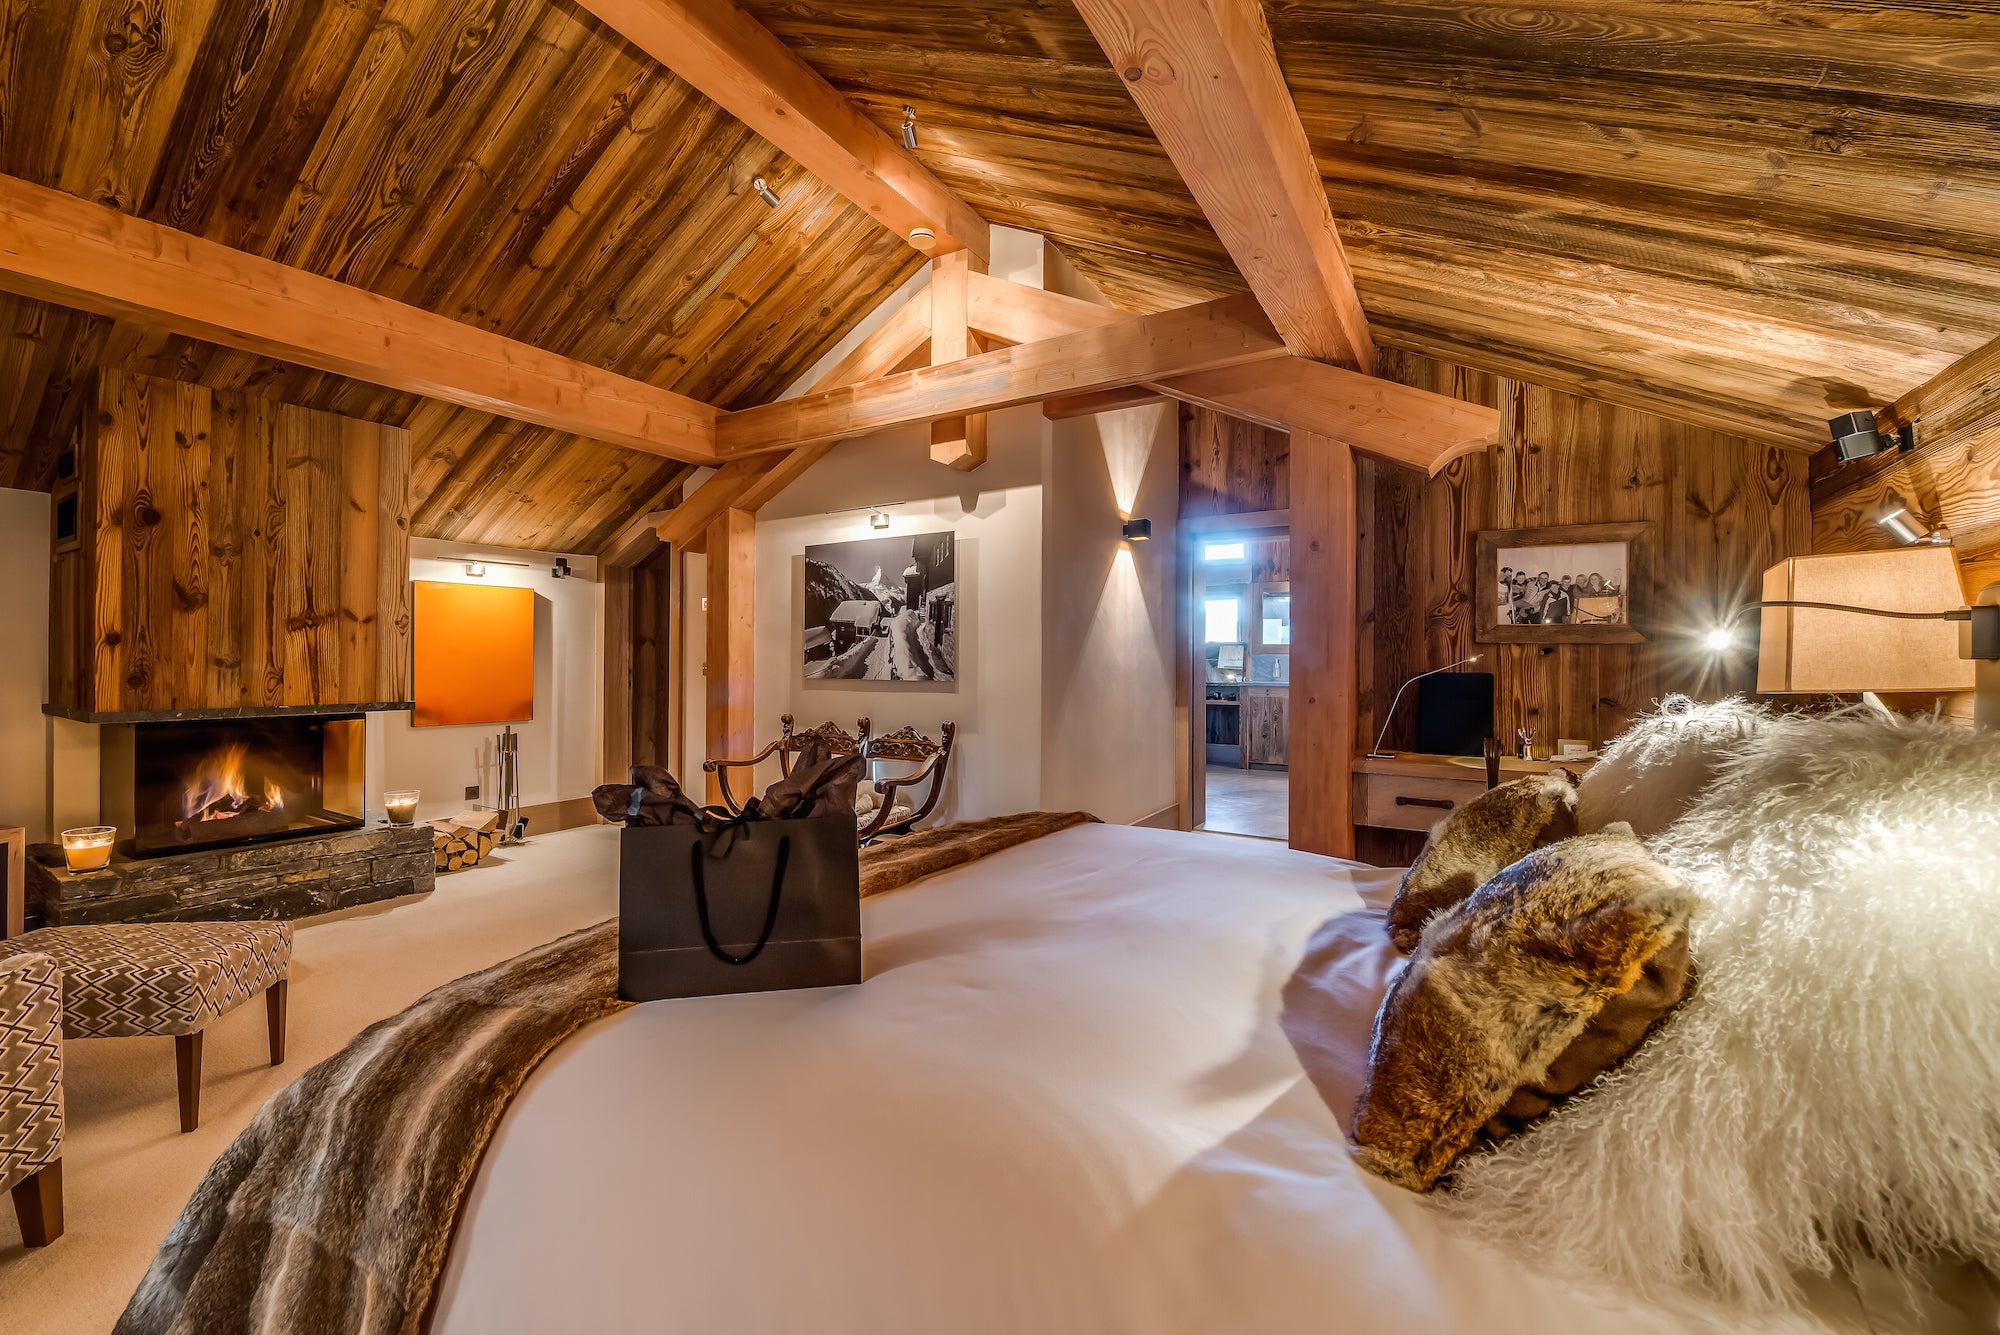 The spacious master bedroom at Chalet Mont Tremblant